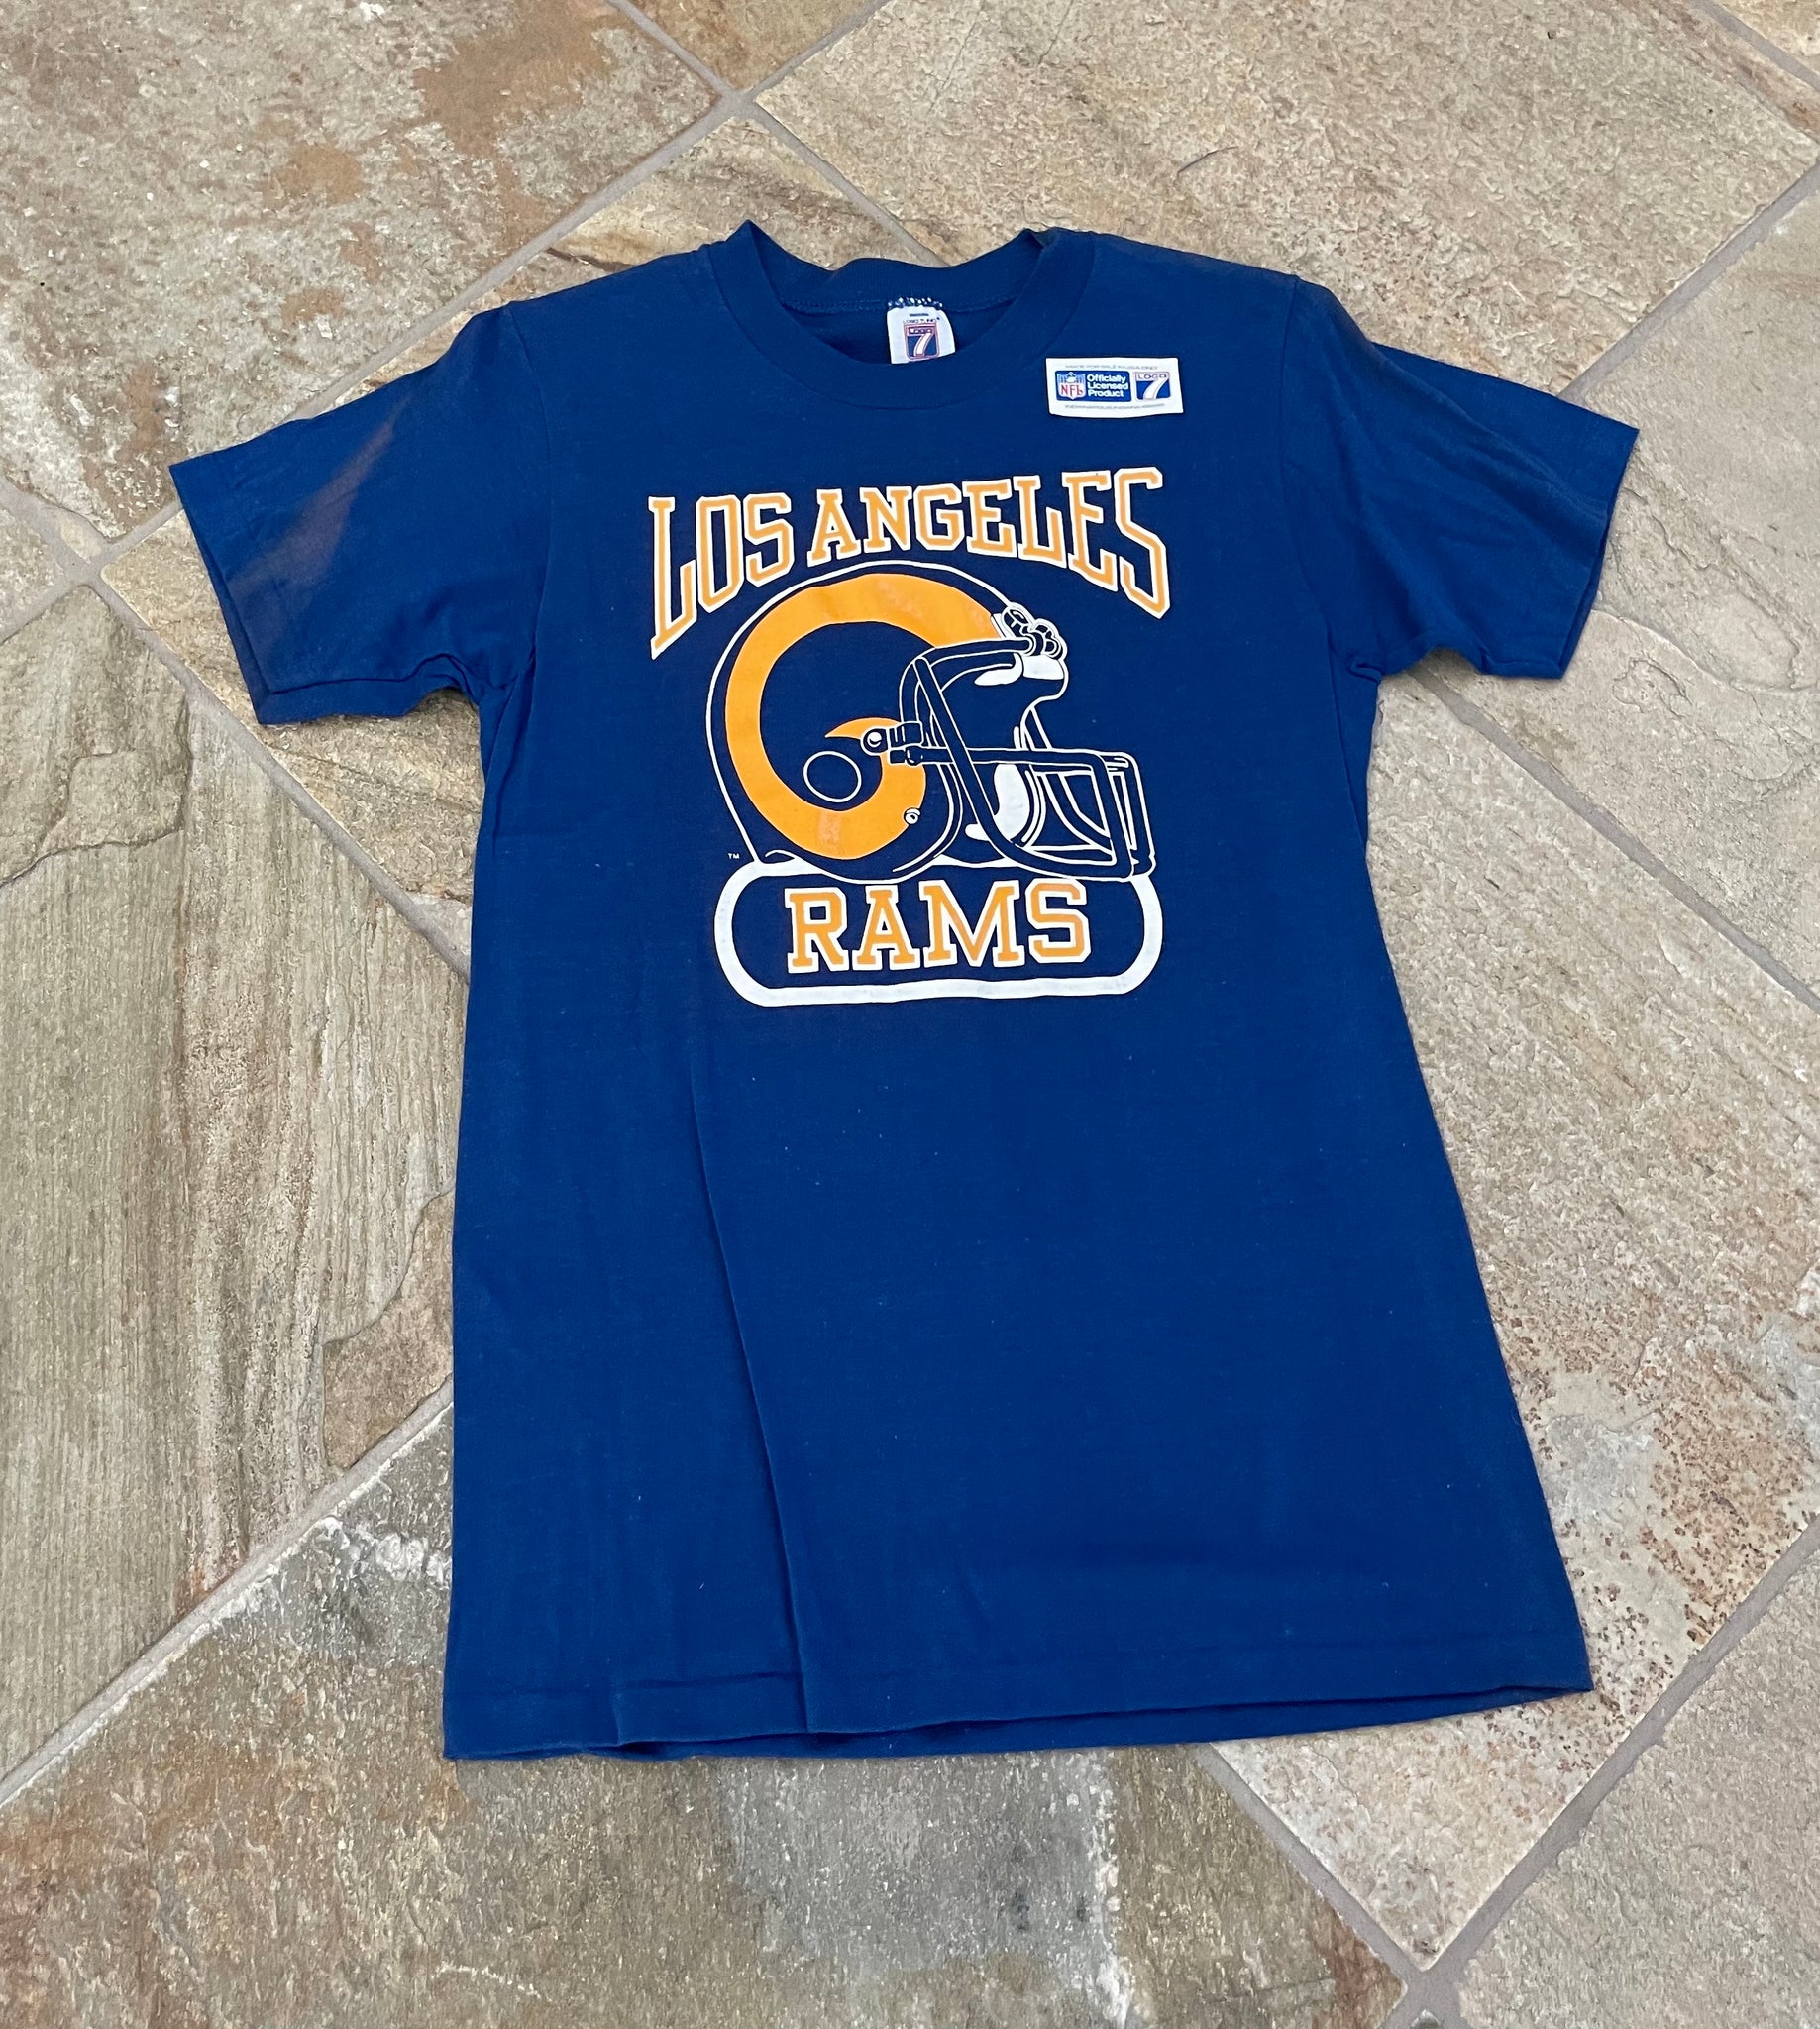 VINTAGE NFL LOS ANGELES RAMS TEE SHIRT SIZE LARGE MADE IN USA 1980s